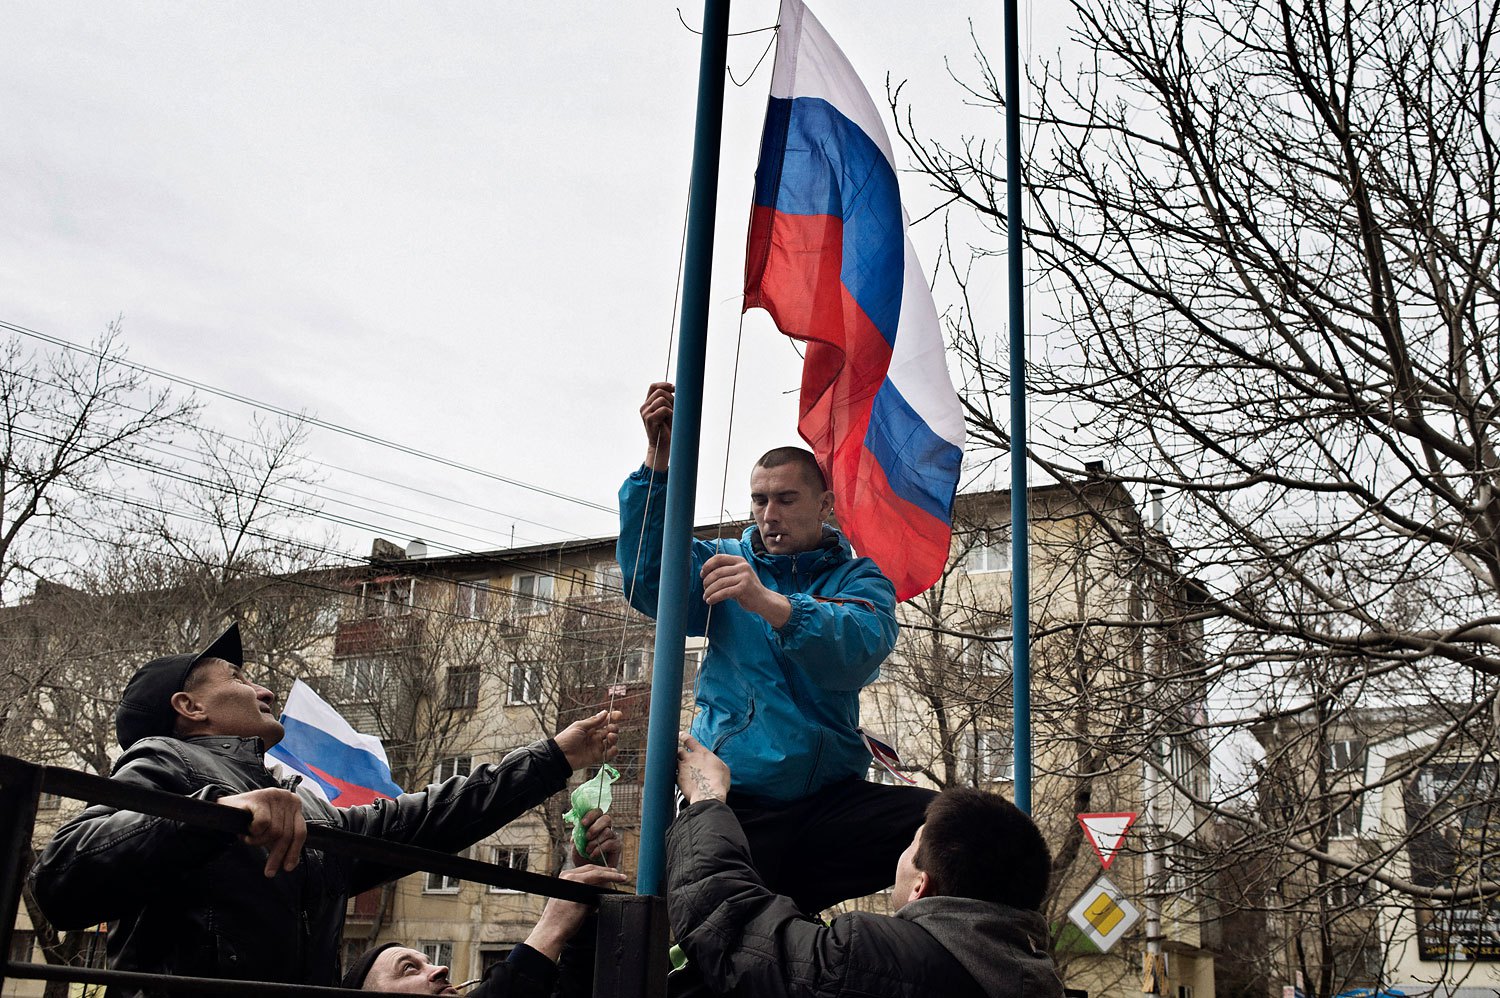 Members of a pro- Russian group raise a Russian flag in front of a military base in Simferopol on Sunday.